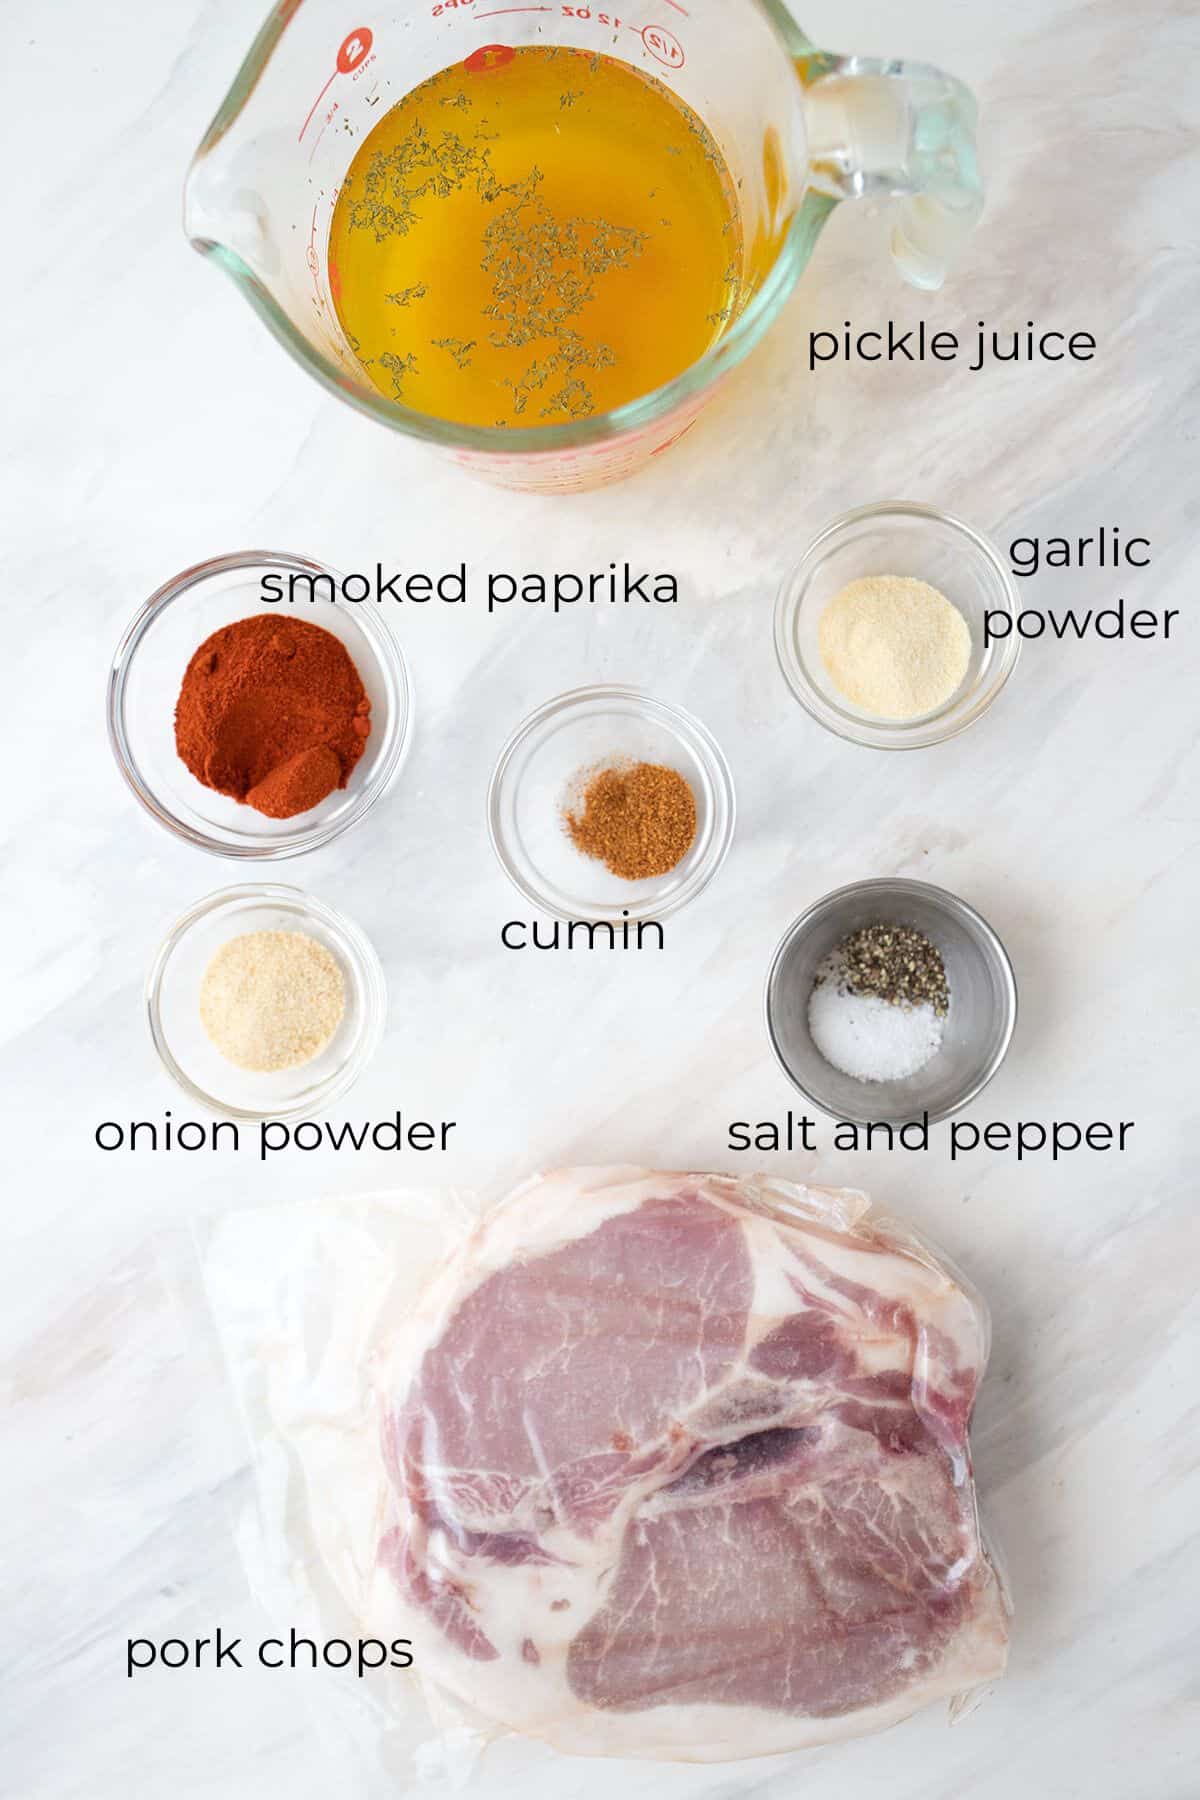 Top down image of labeled ingredients for grilled pork chops